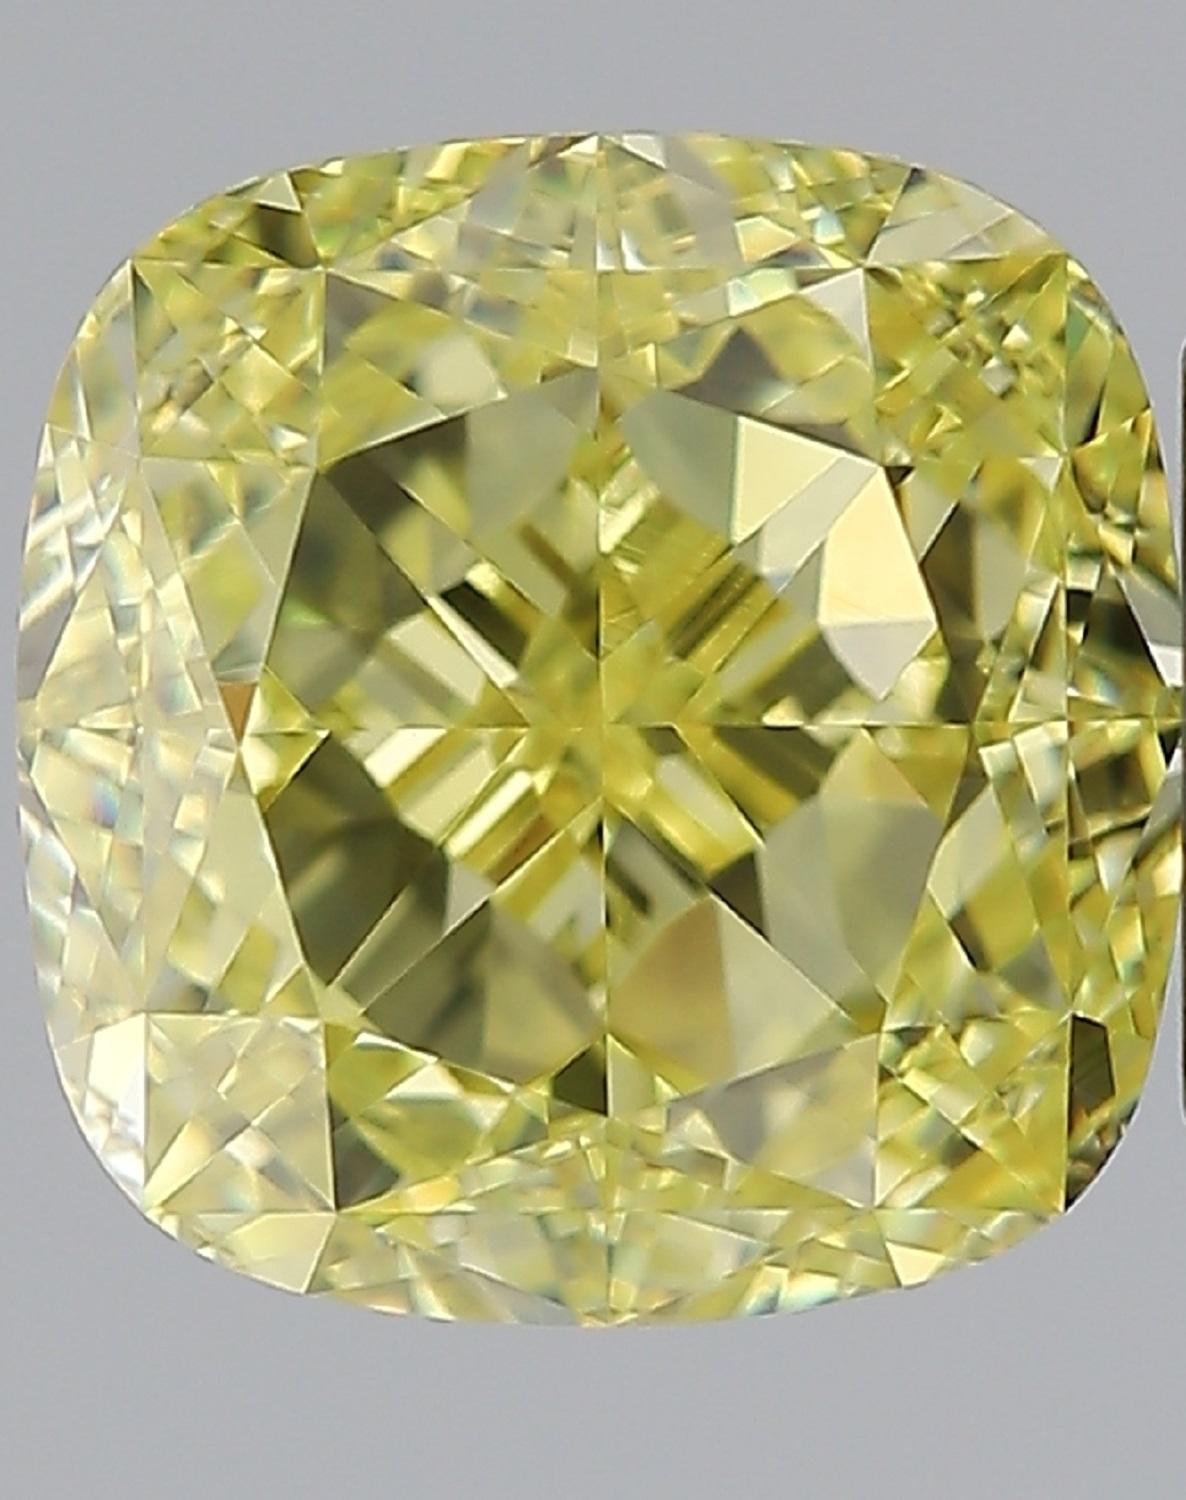 I FLAWLESS GIA Certified 3.51 Carat Fancy Intense Yellow Diamond
Investment grade diamond

Inquire us about the perfect mounting for this beautiful ring we have the very best italian handmandcrafters